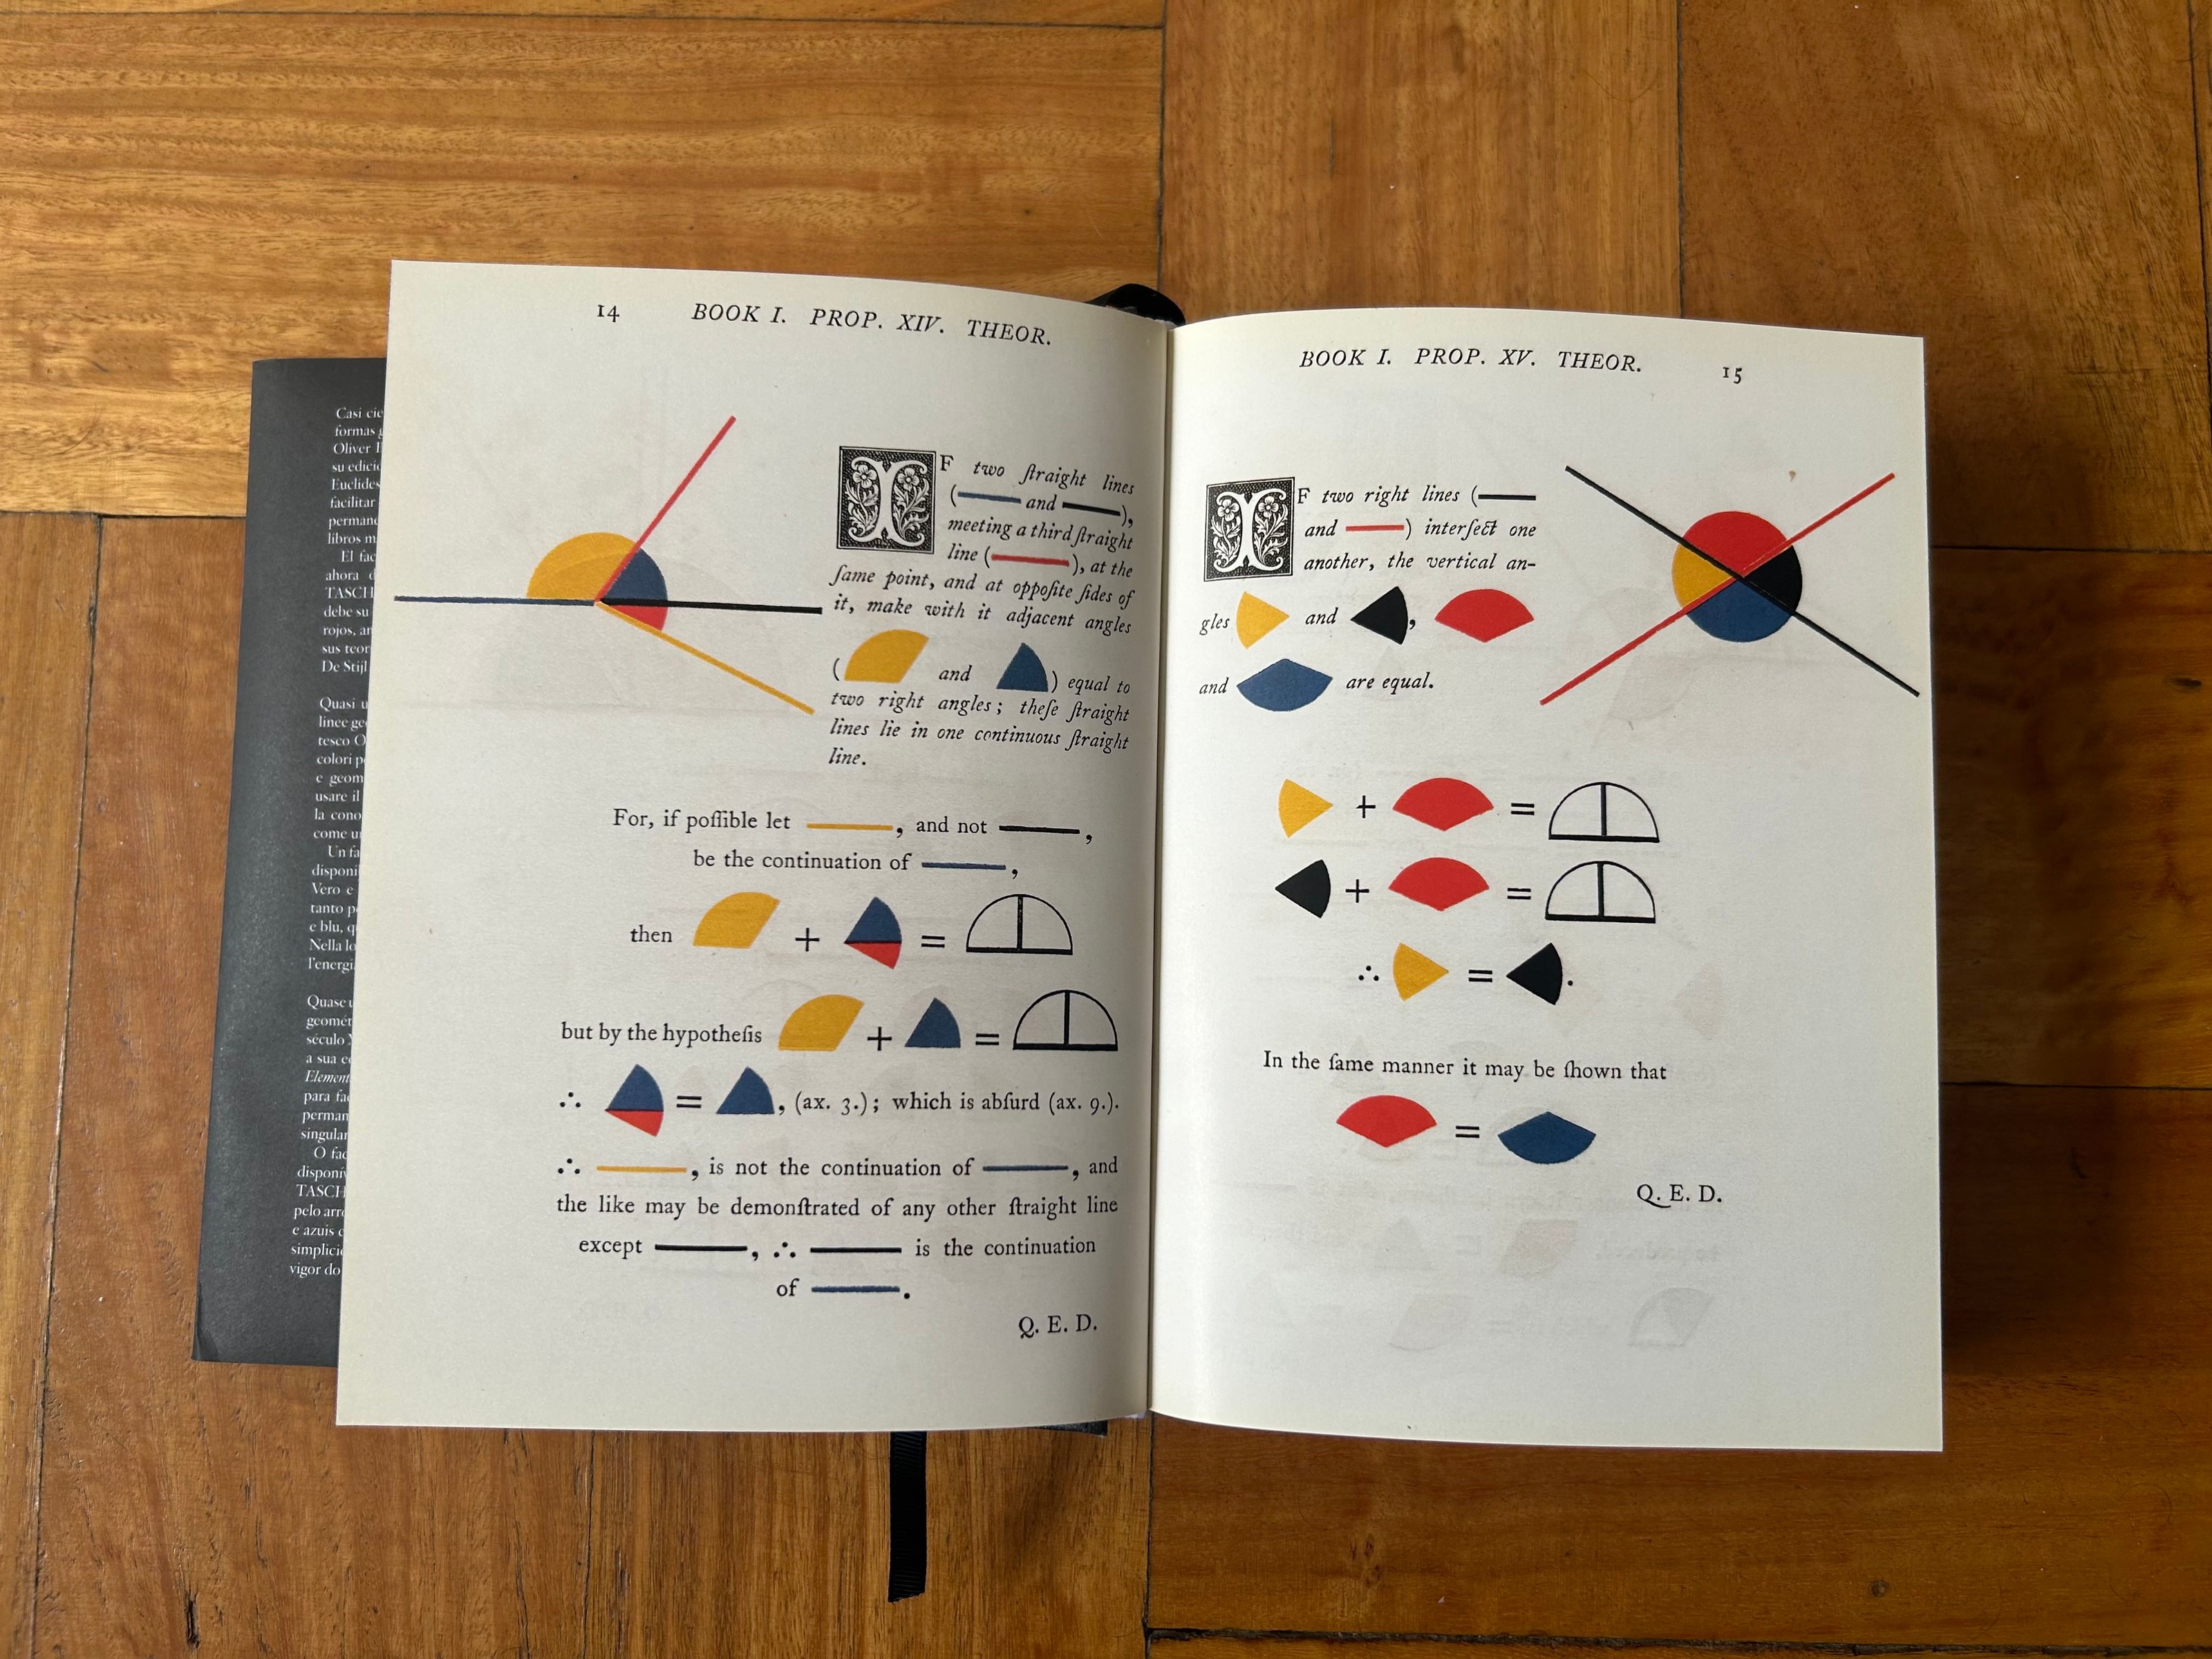 Photo of page 14 and 15 of my copy of the book, showcasing two line intersection and angle diagrams